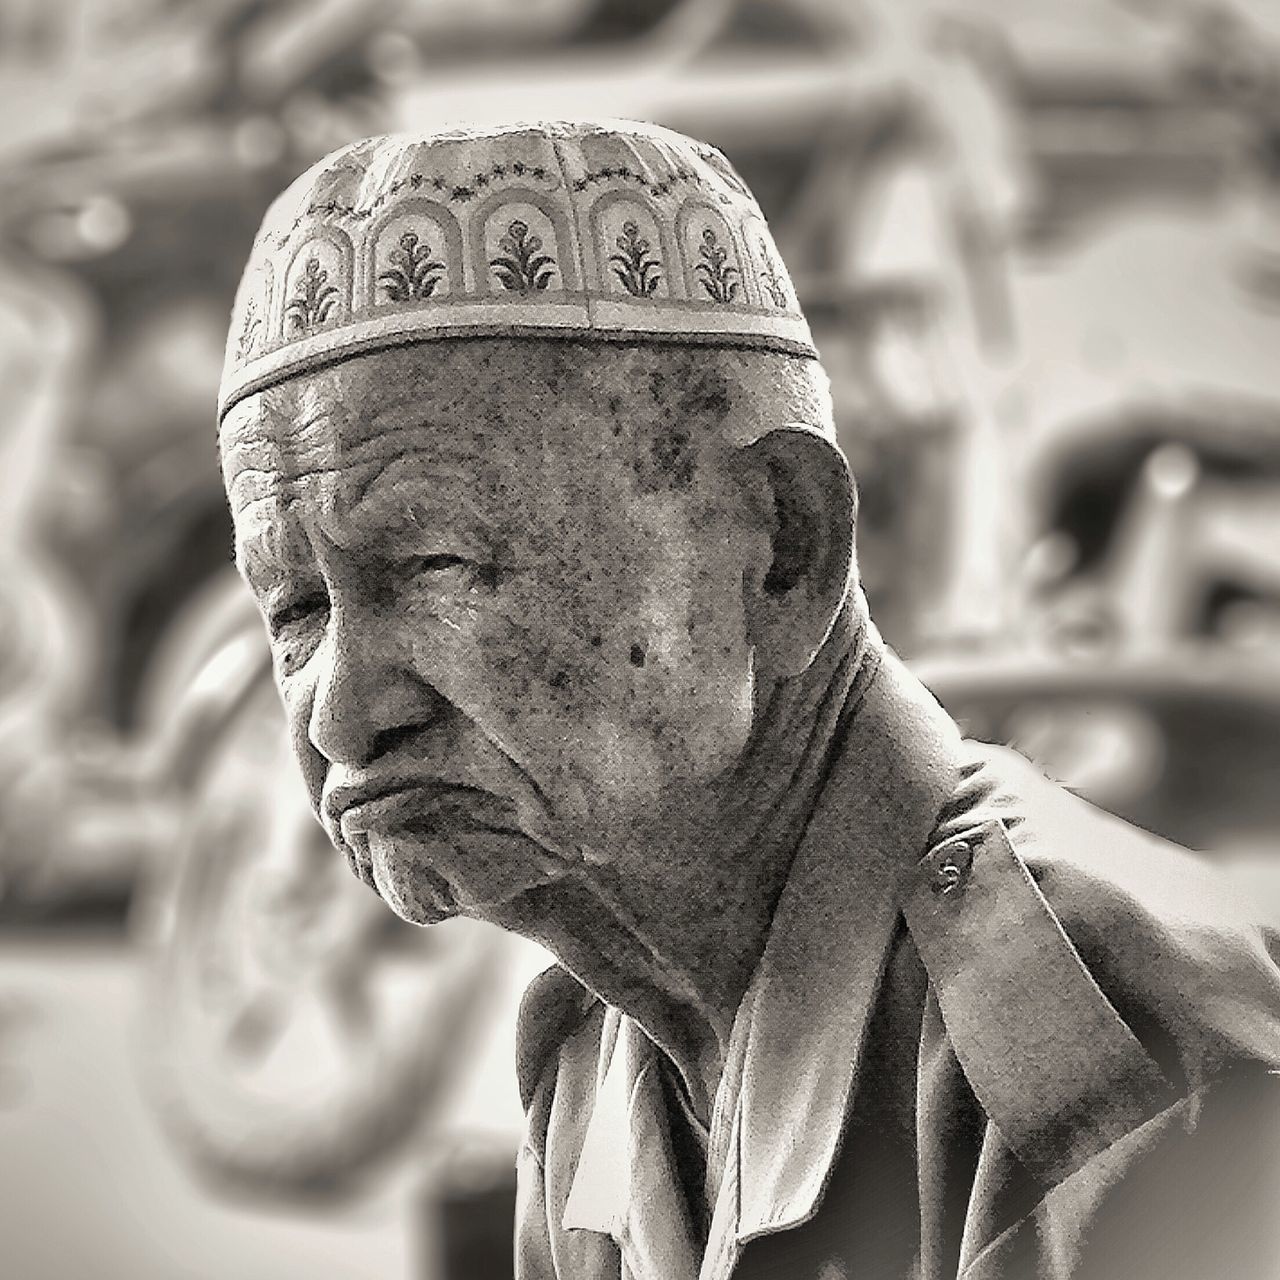 focus on foreground, close-up, human representation, art and craft, sculpture, statue, art, creativity, selective focus, day, carving - craft product, outdoors, old, stone material, no people, detail, text, death, nature